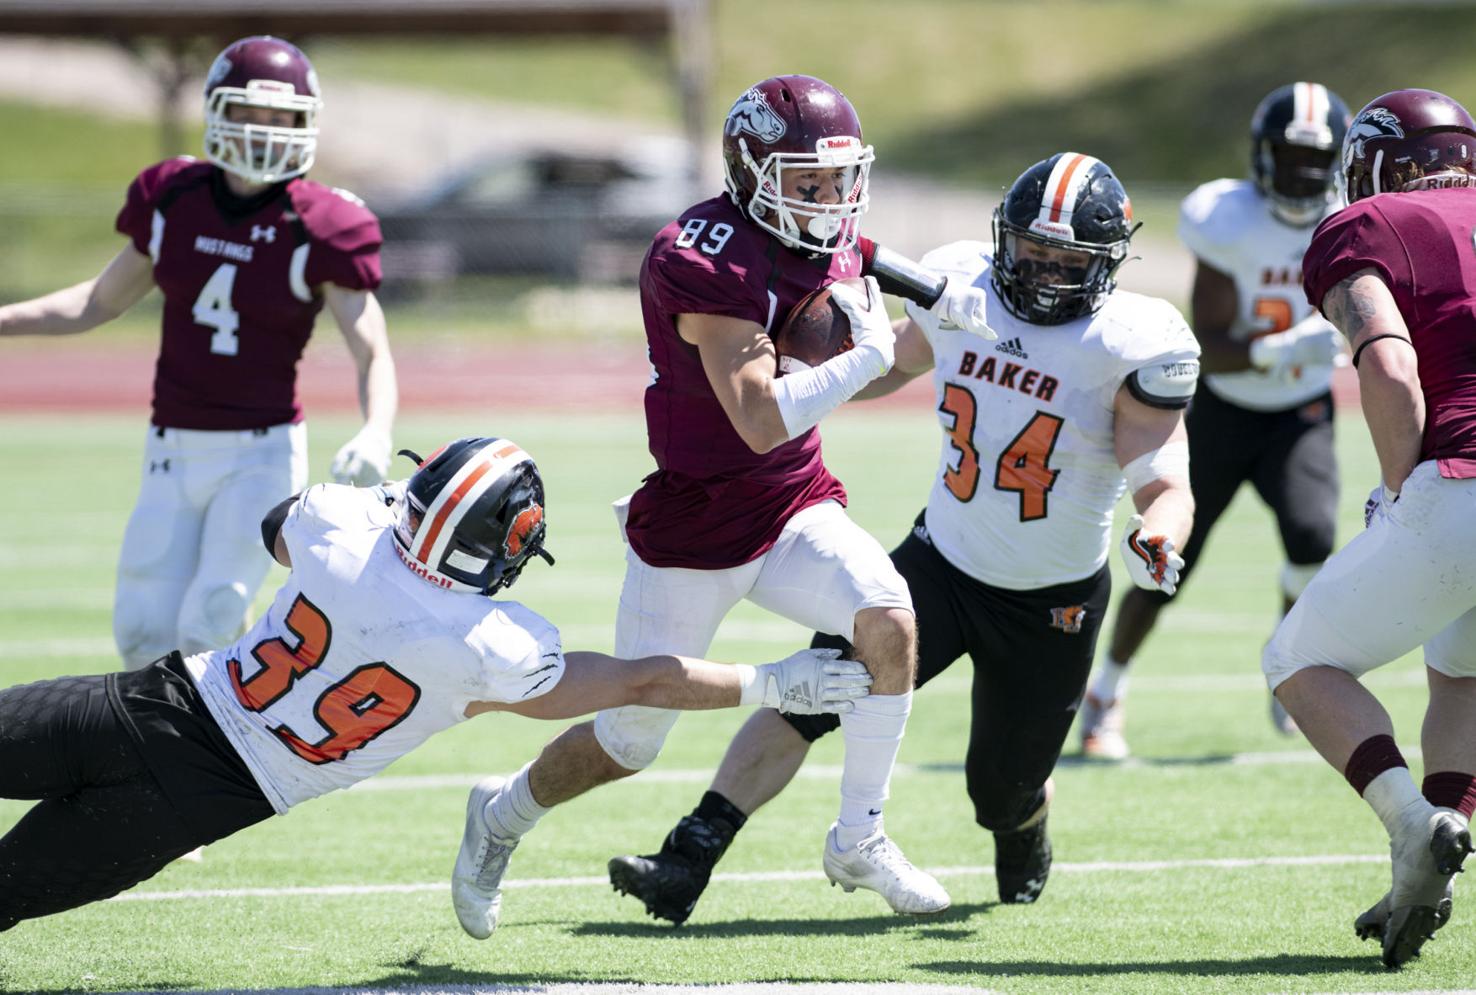 Morningside football comes to life in second half, advance to semifinal